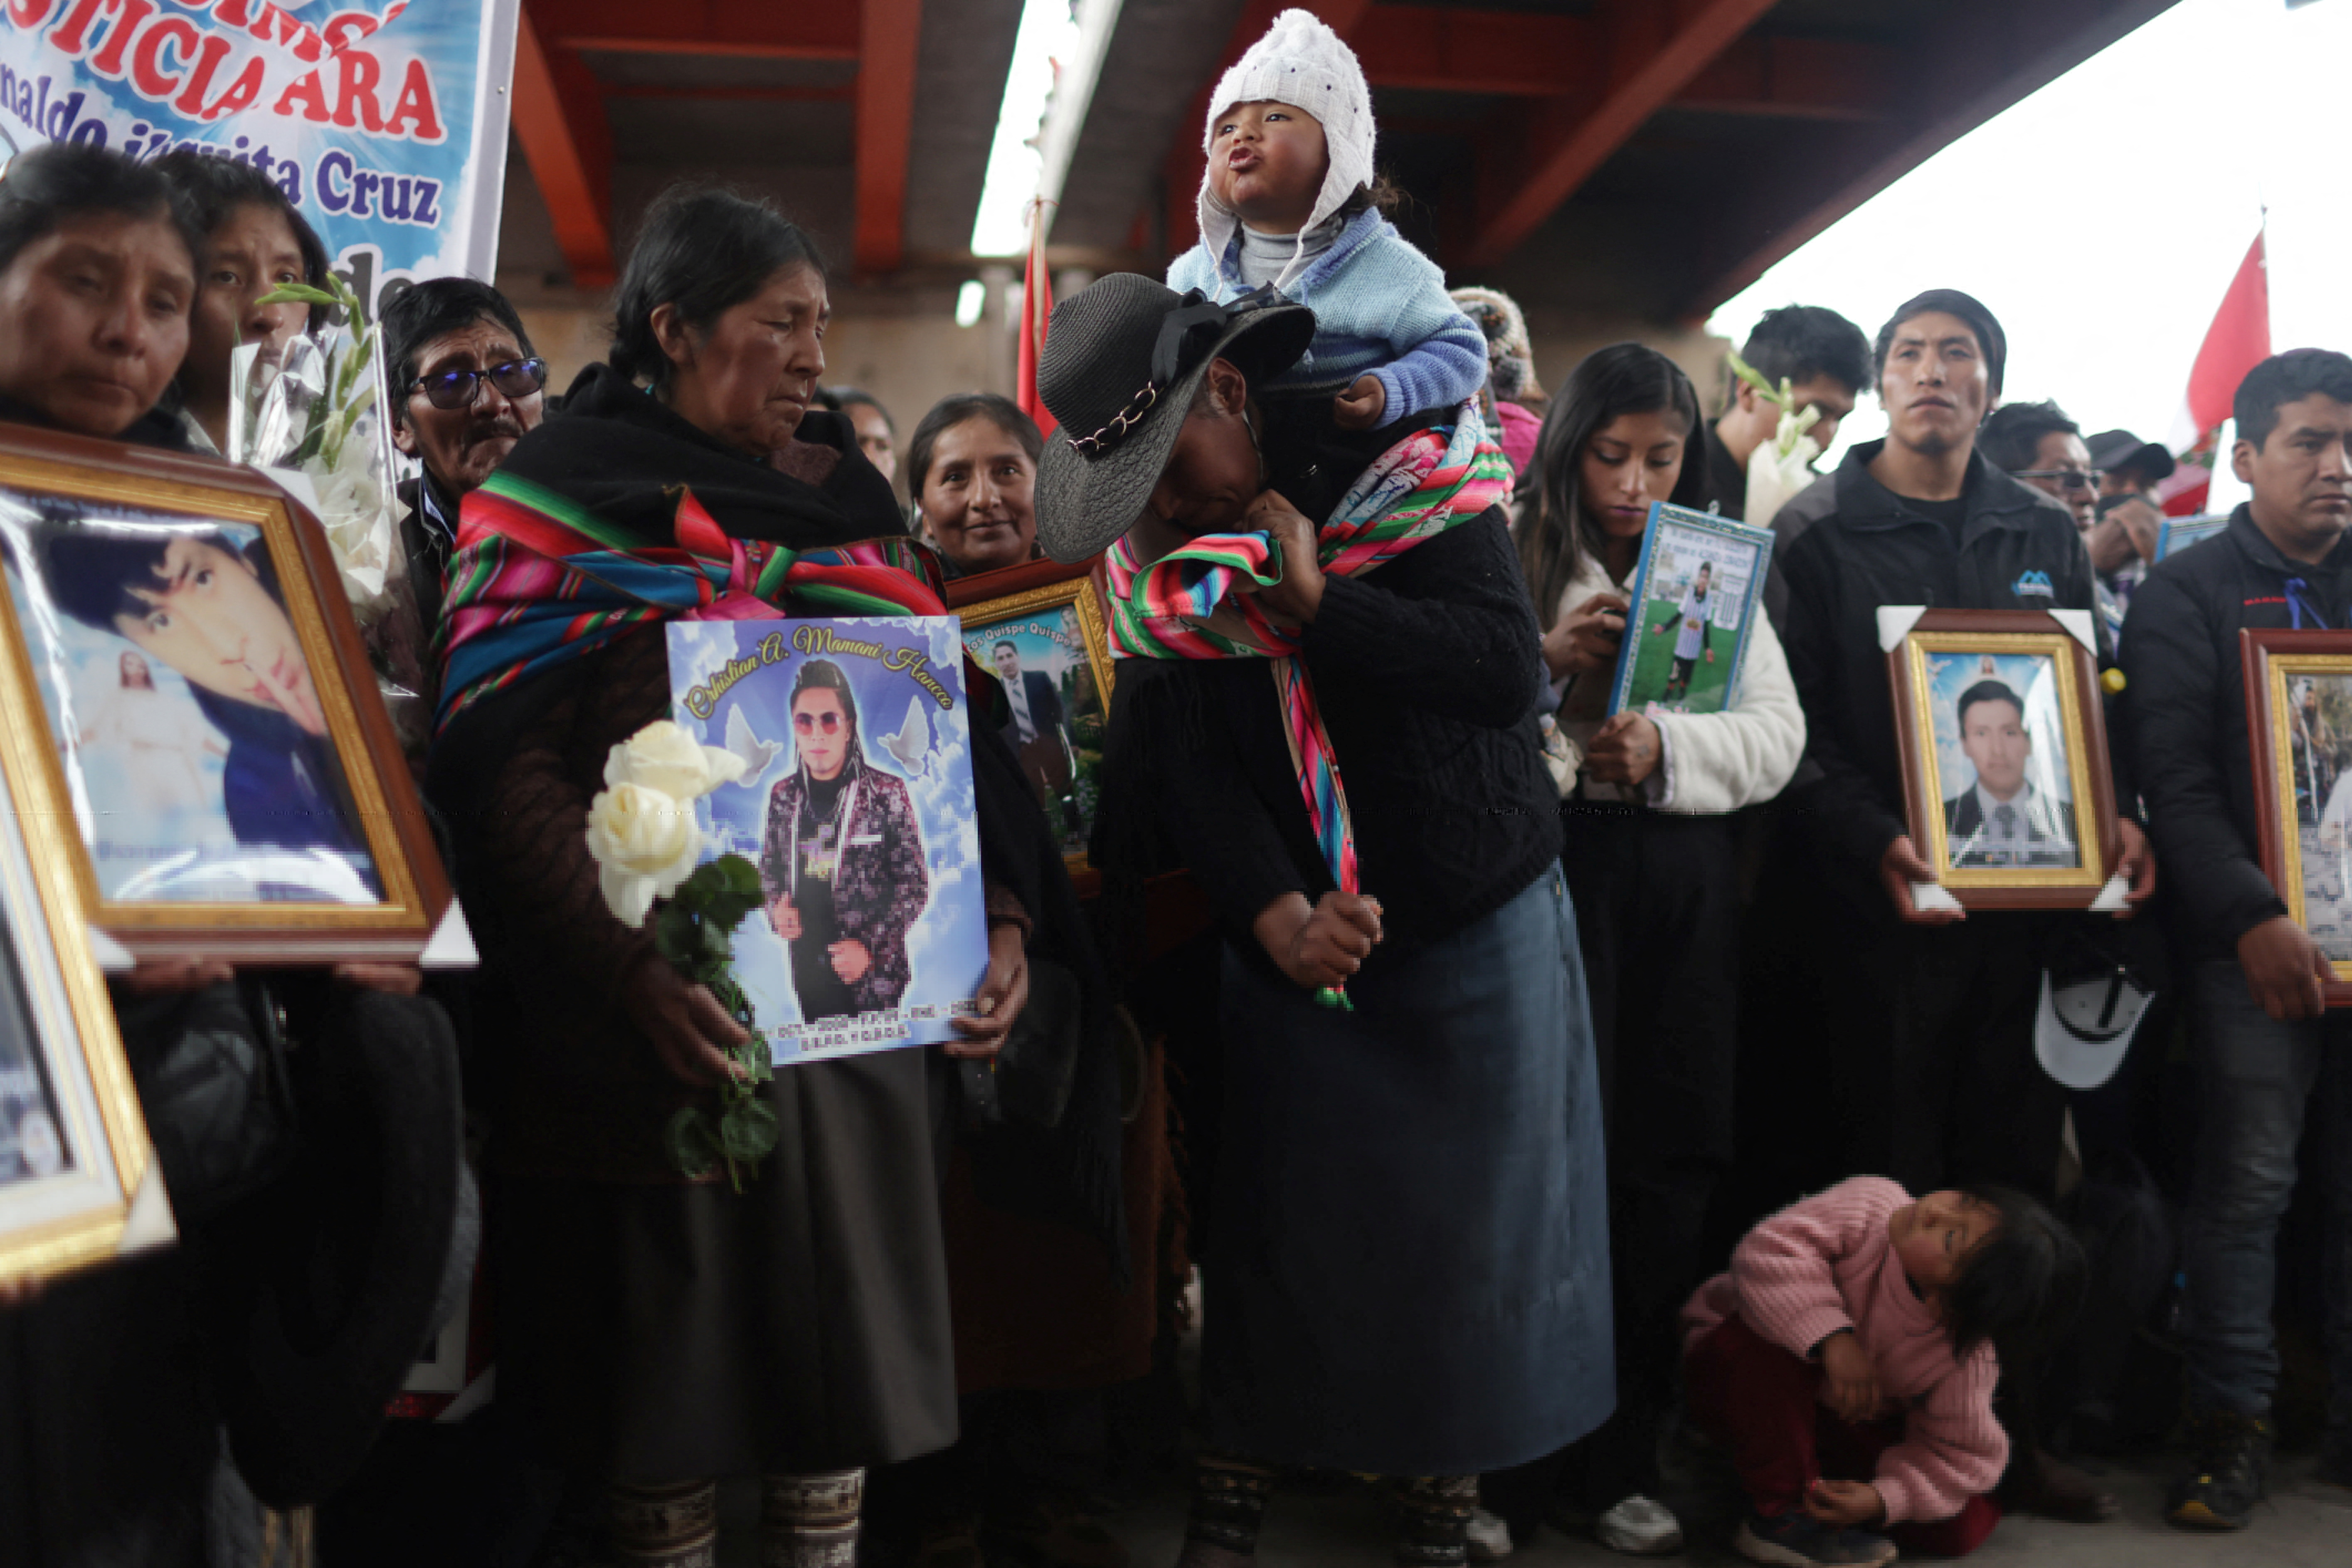 Relatives mourn victims one month after the deadliest clashes in anti-government protests against Peru's President Dina Boluarte, in Juliaca